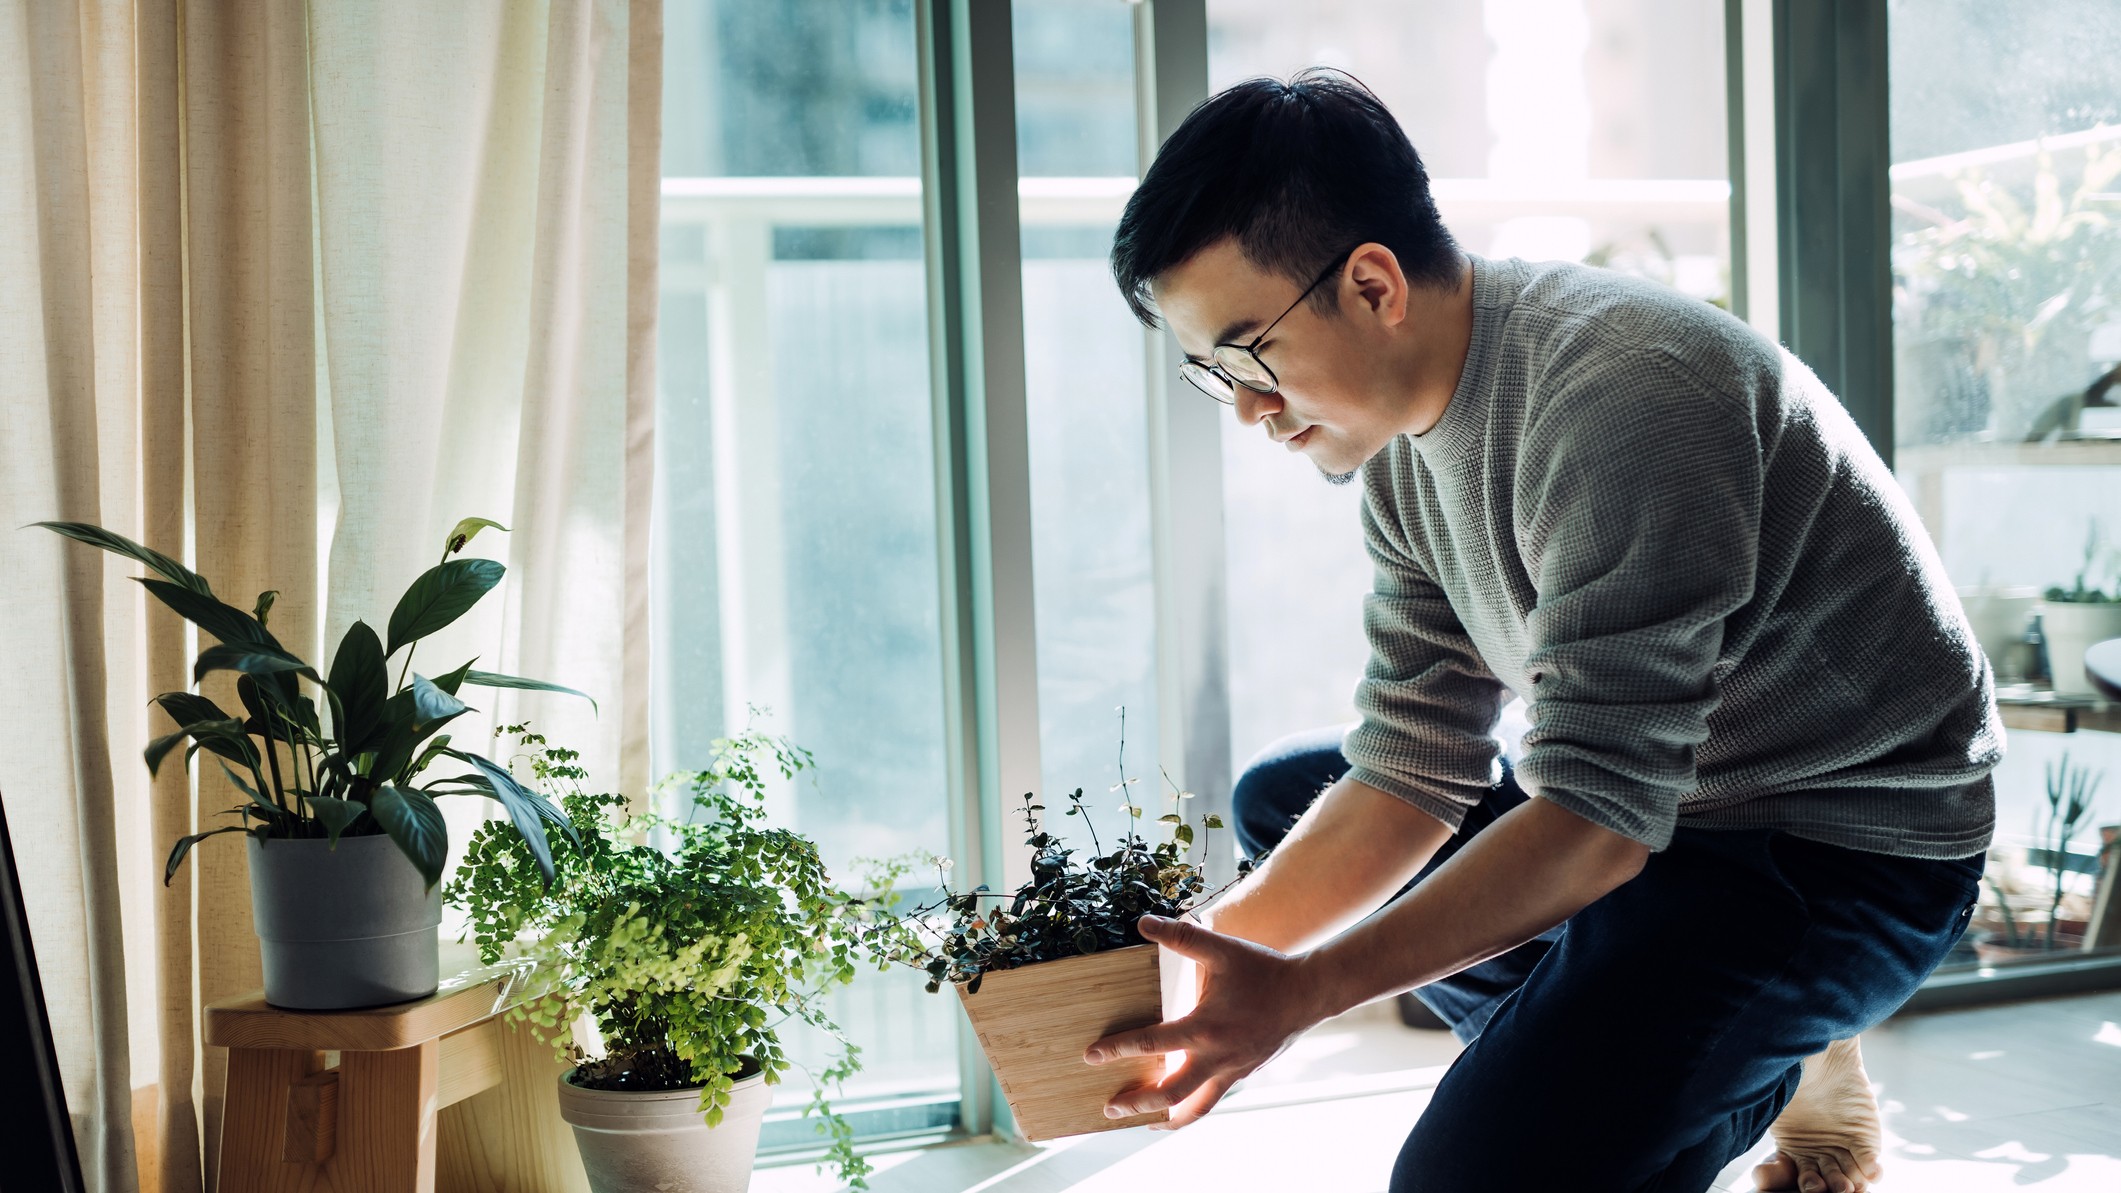 A man looking after houseplants